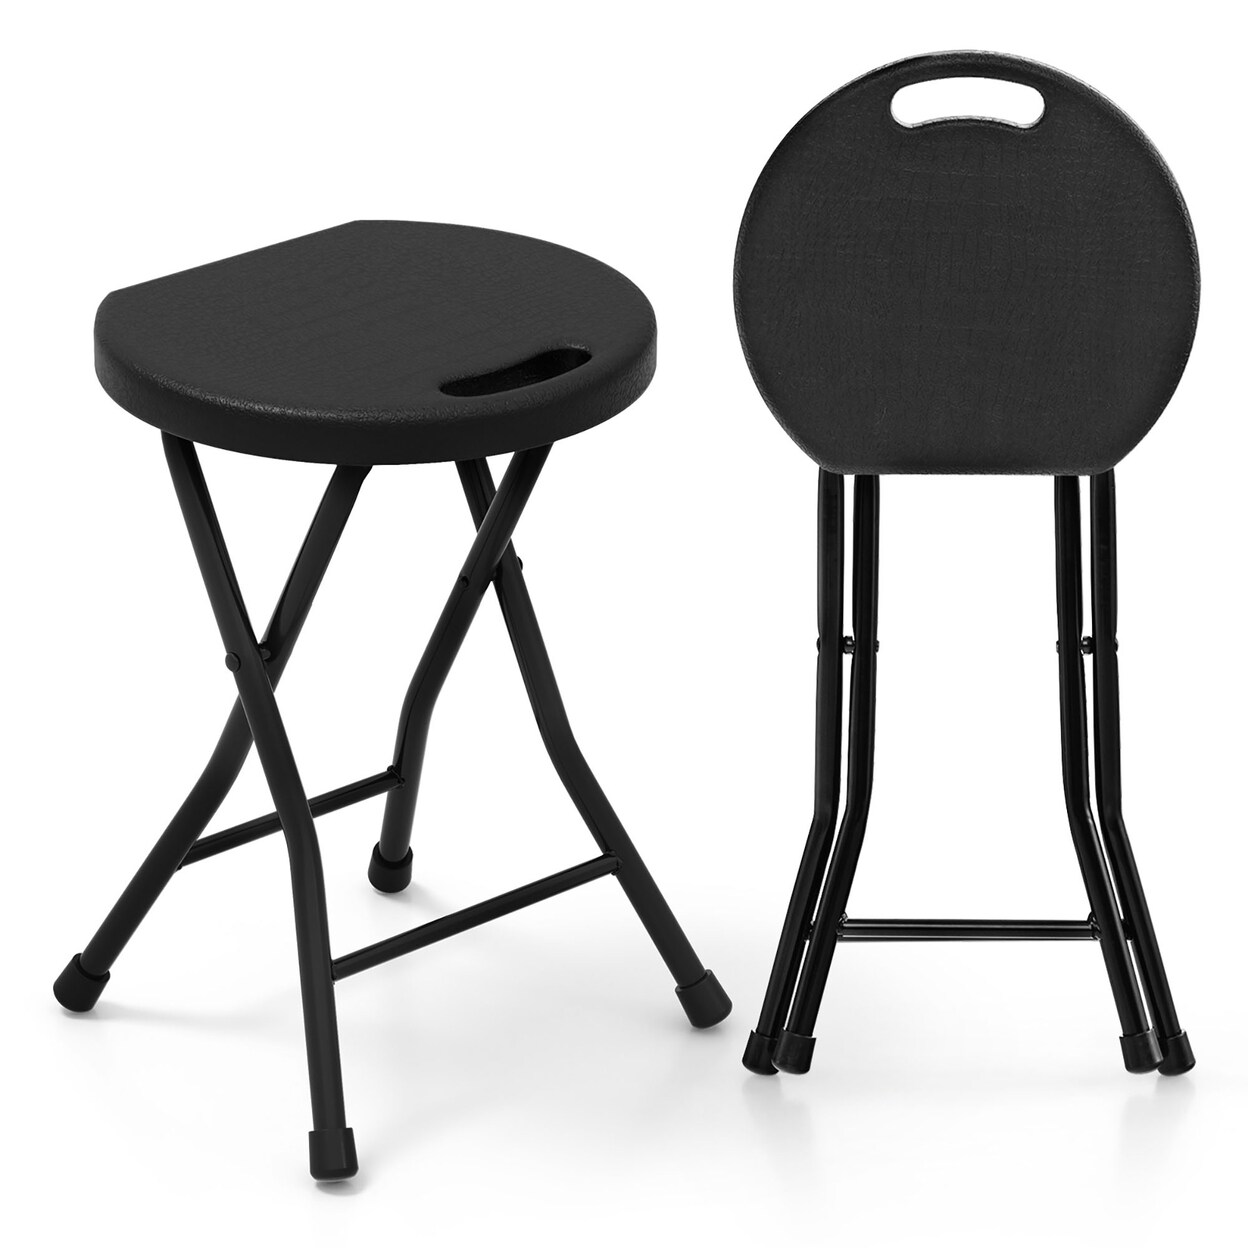 Gymax Set of 2 Outdoor Folding Stool Portable Space-Saving Round X Shaped Chair Black